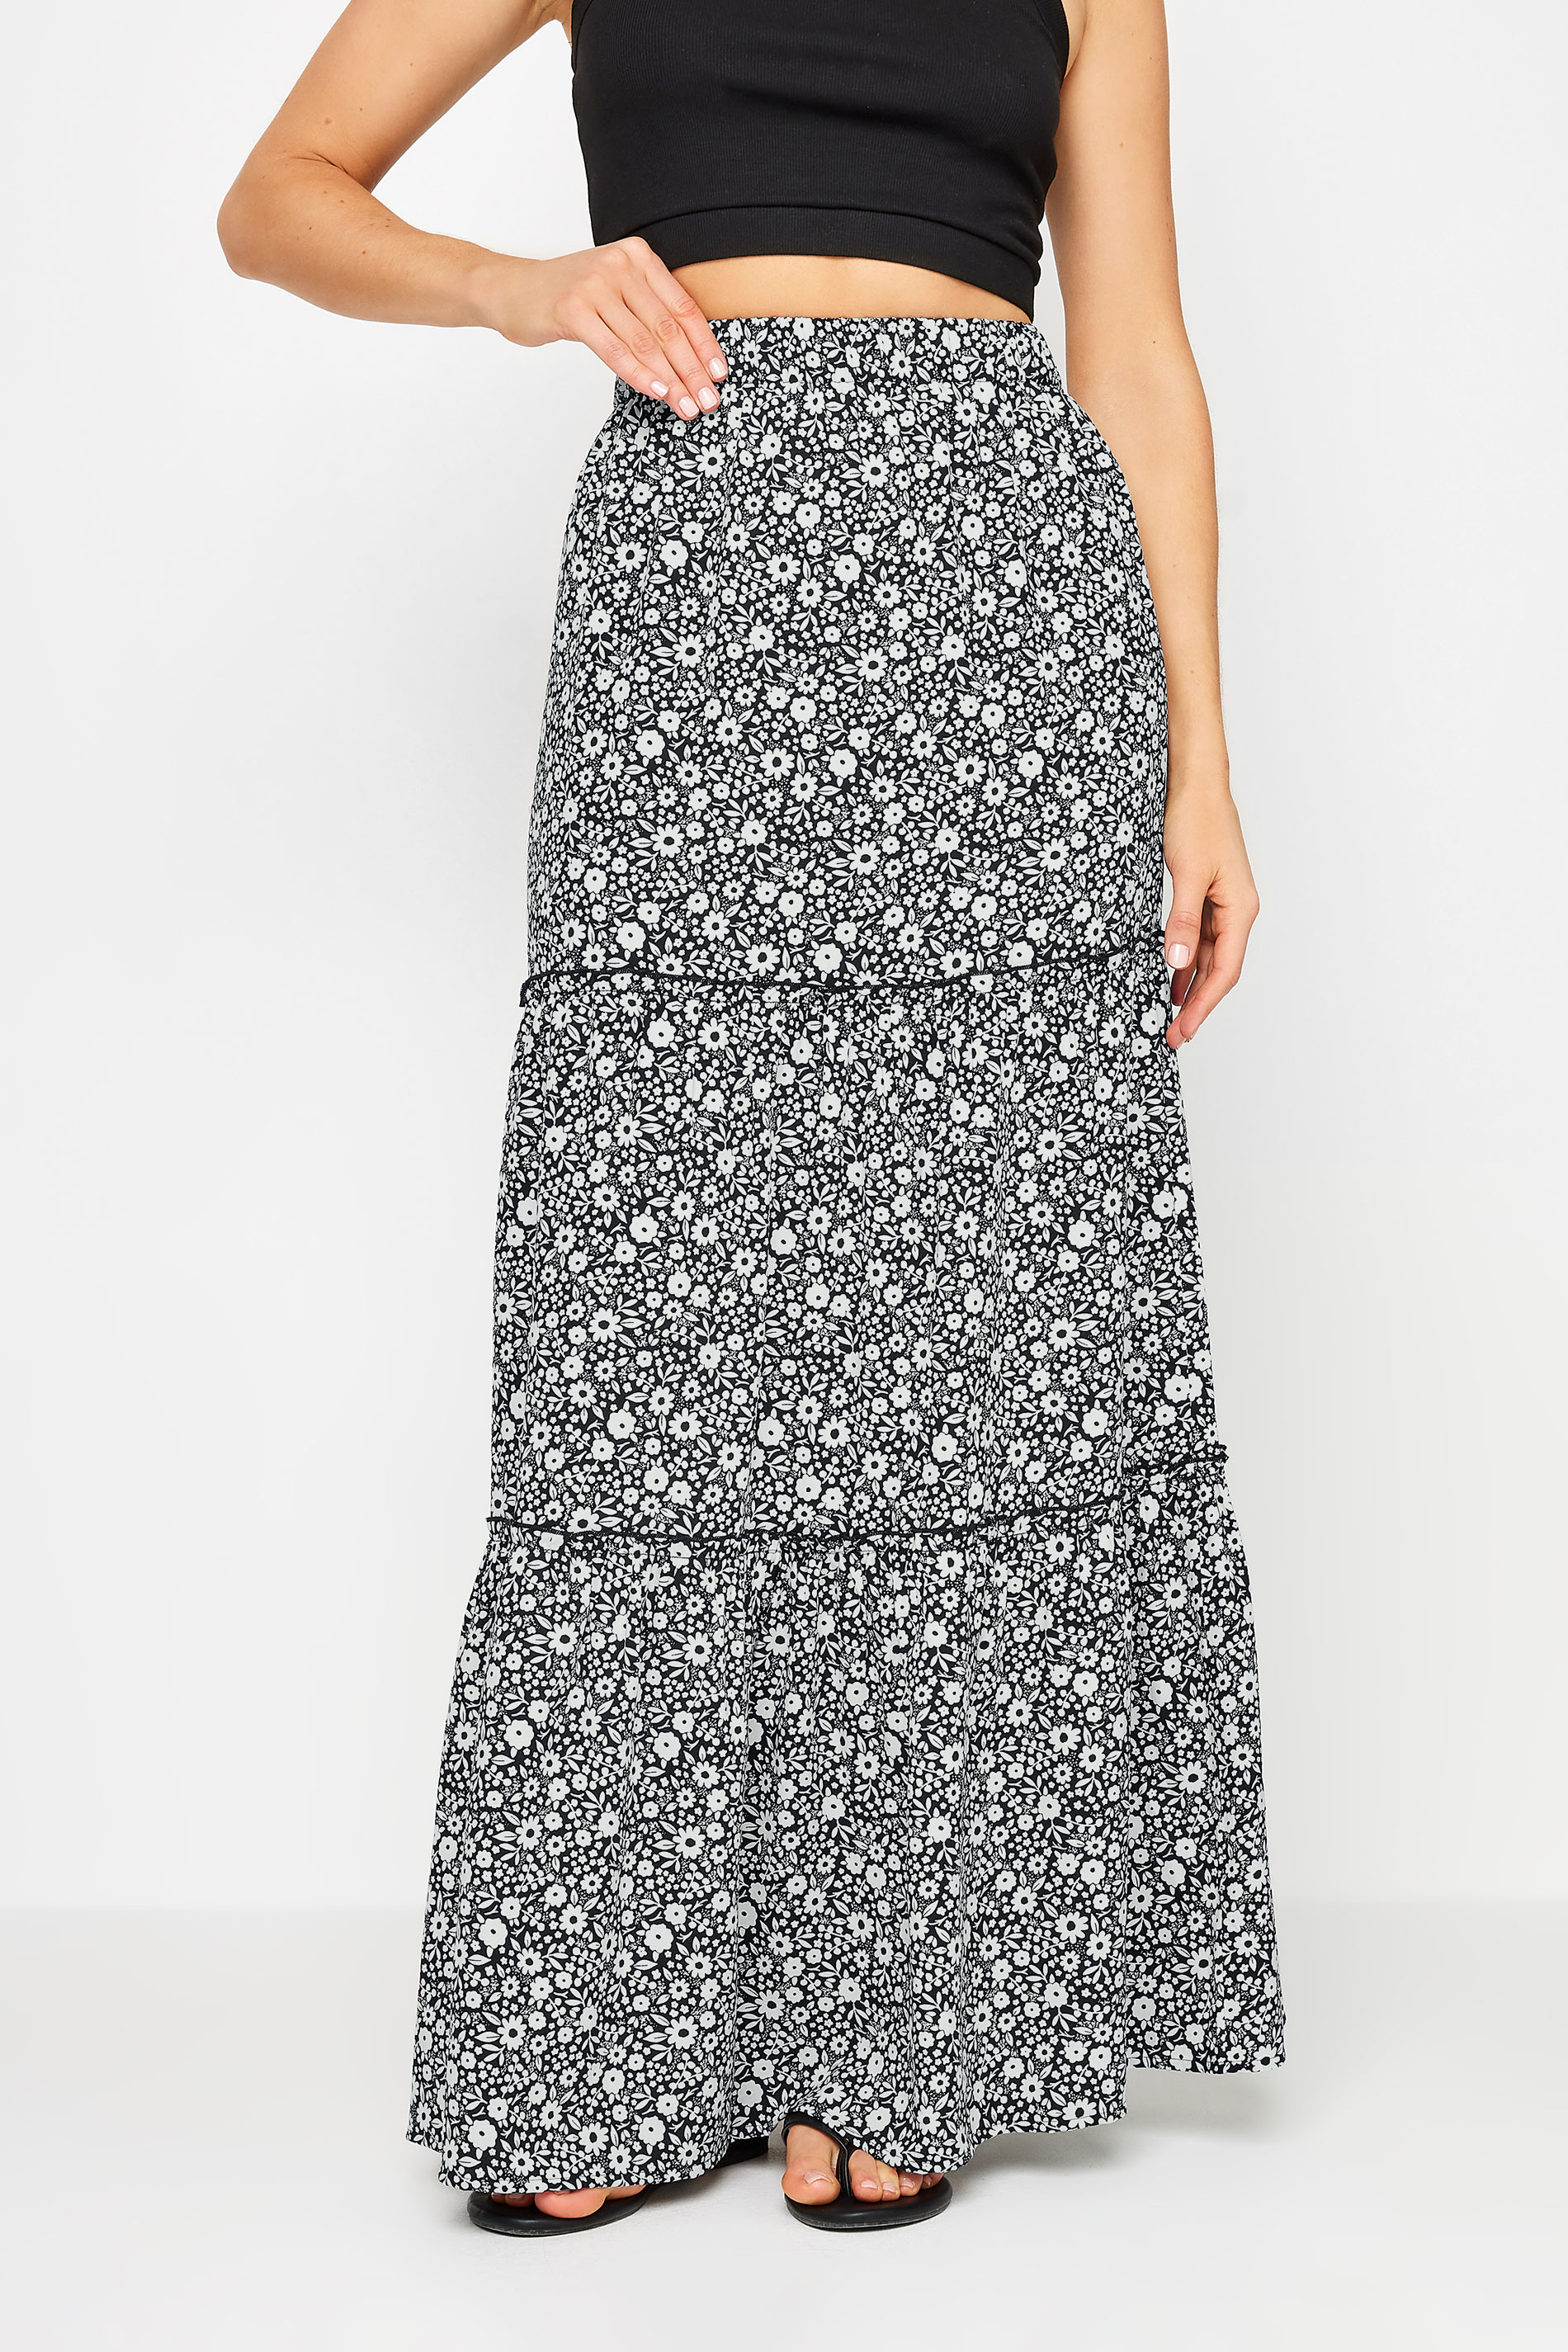 LTS Tall Women's Black & White Ditsy Floral Print Tiered Maxi Skirt | Long Tall Sally 2